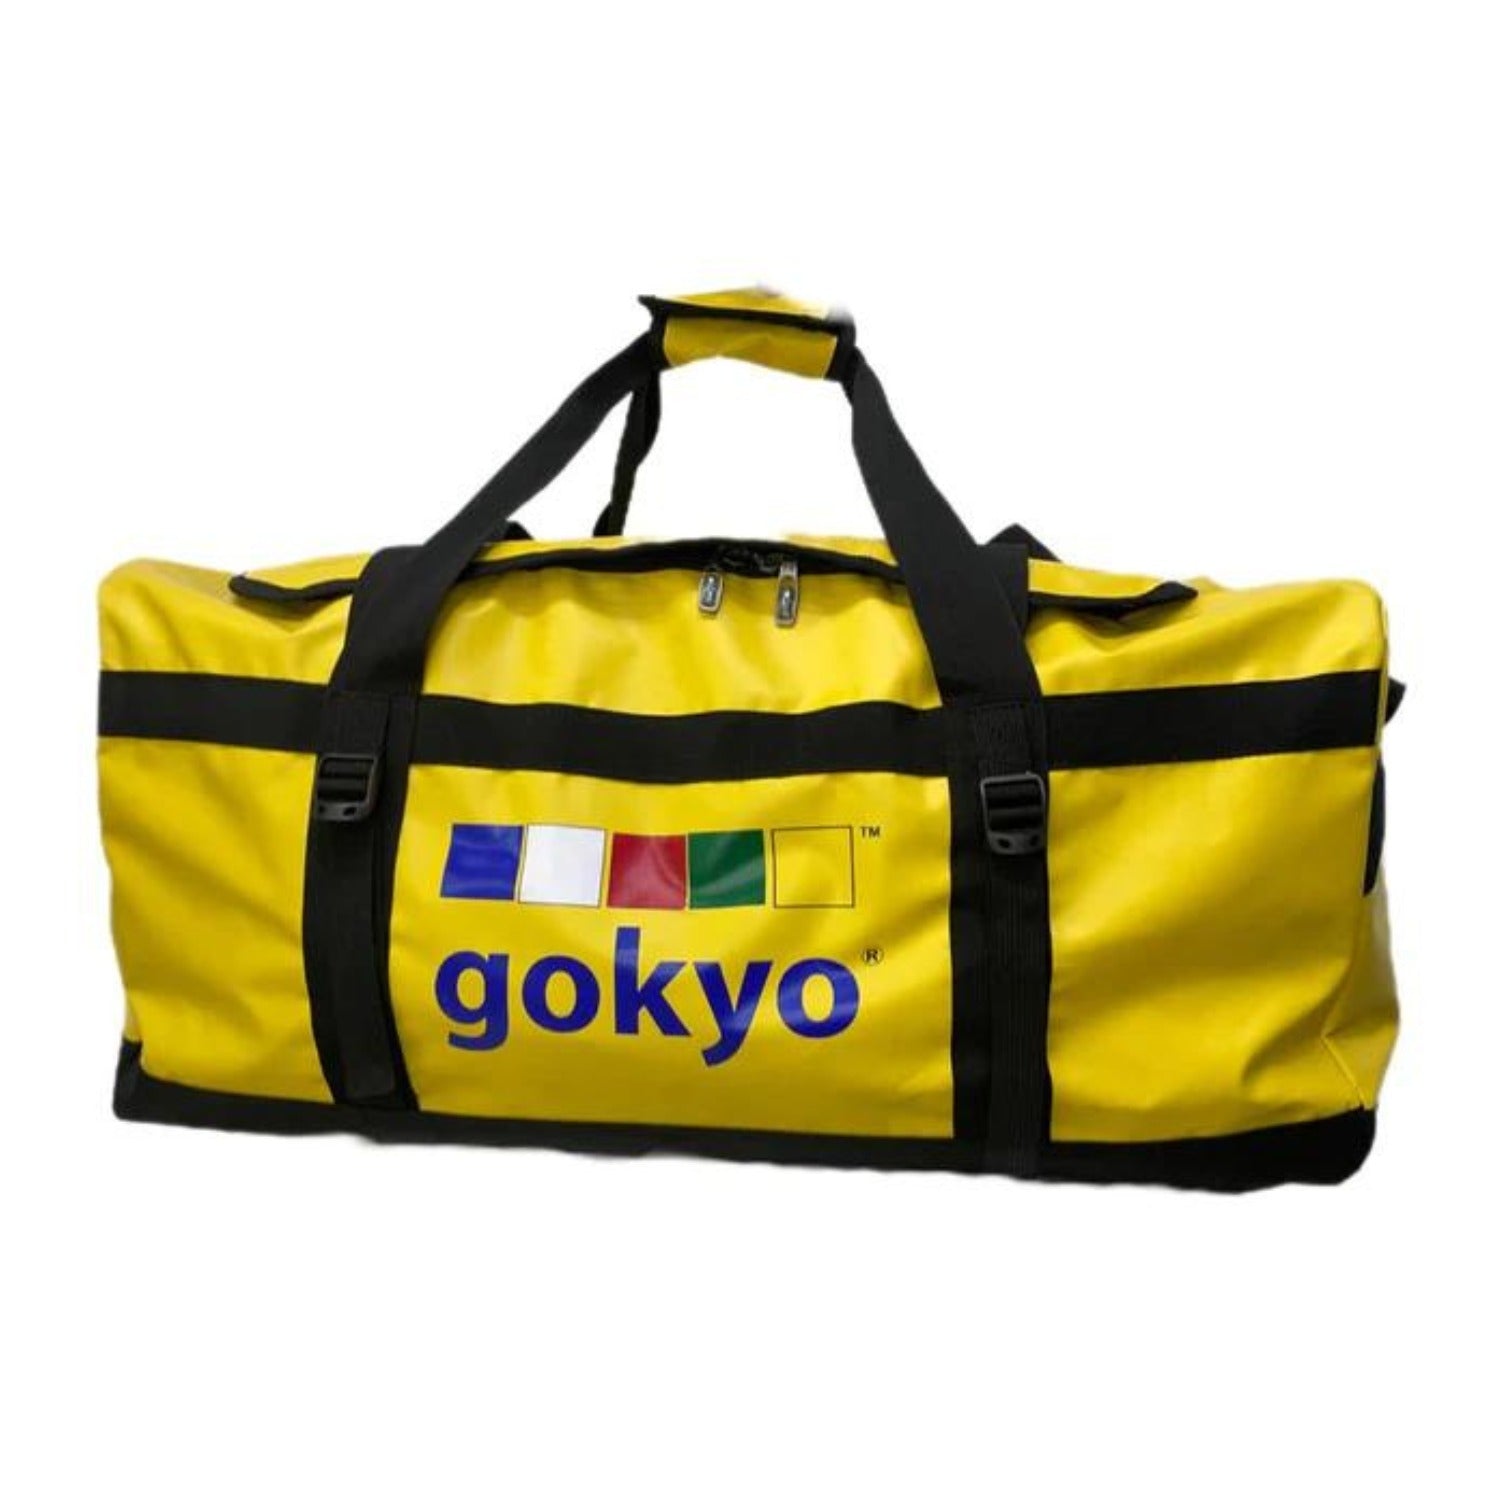 Buy Gokyo K2 Duffle Bag for Treks & Expeditions Yellow | Trekking & Expedition Duffle Bag at Gokyo Outdoor Clothing & Gear